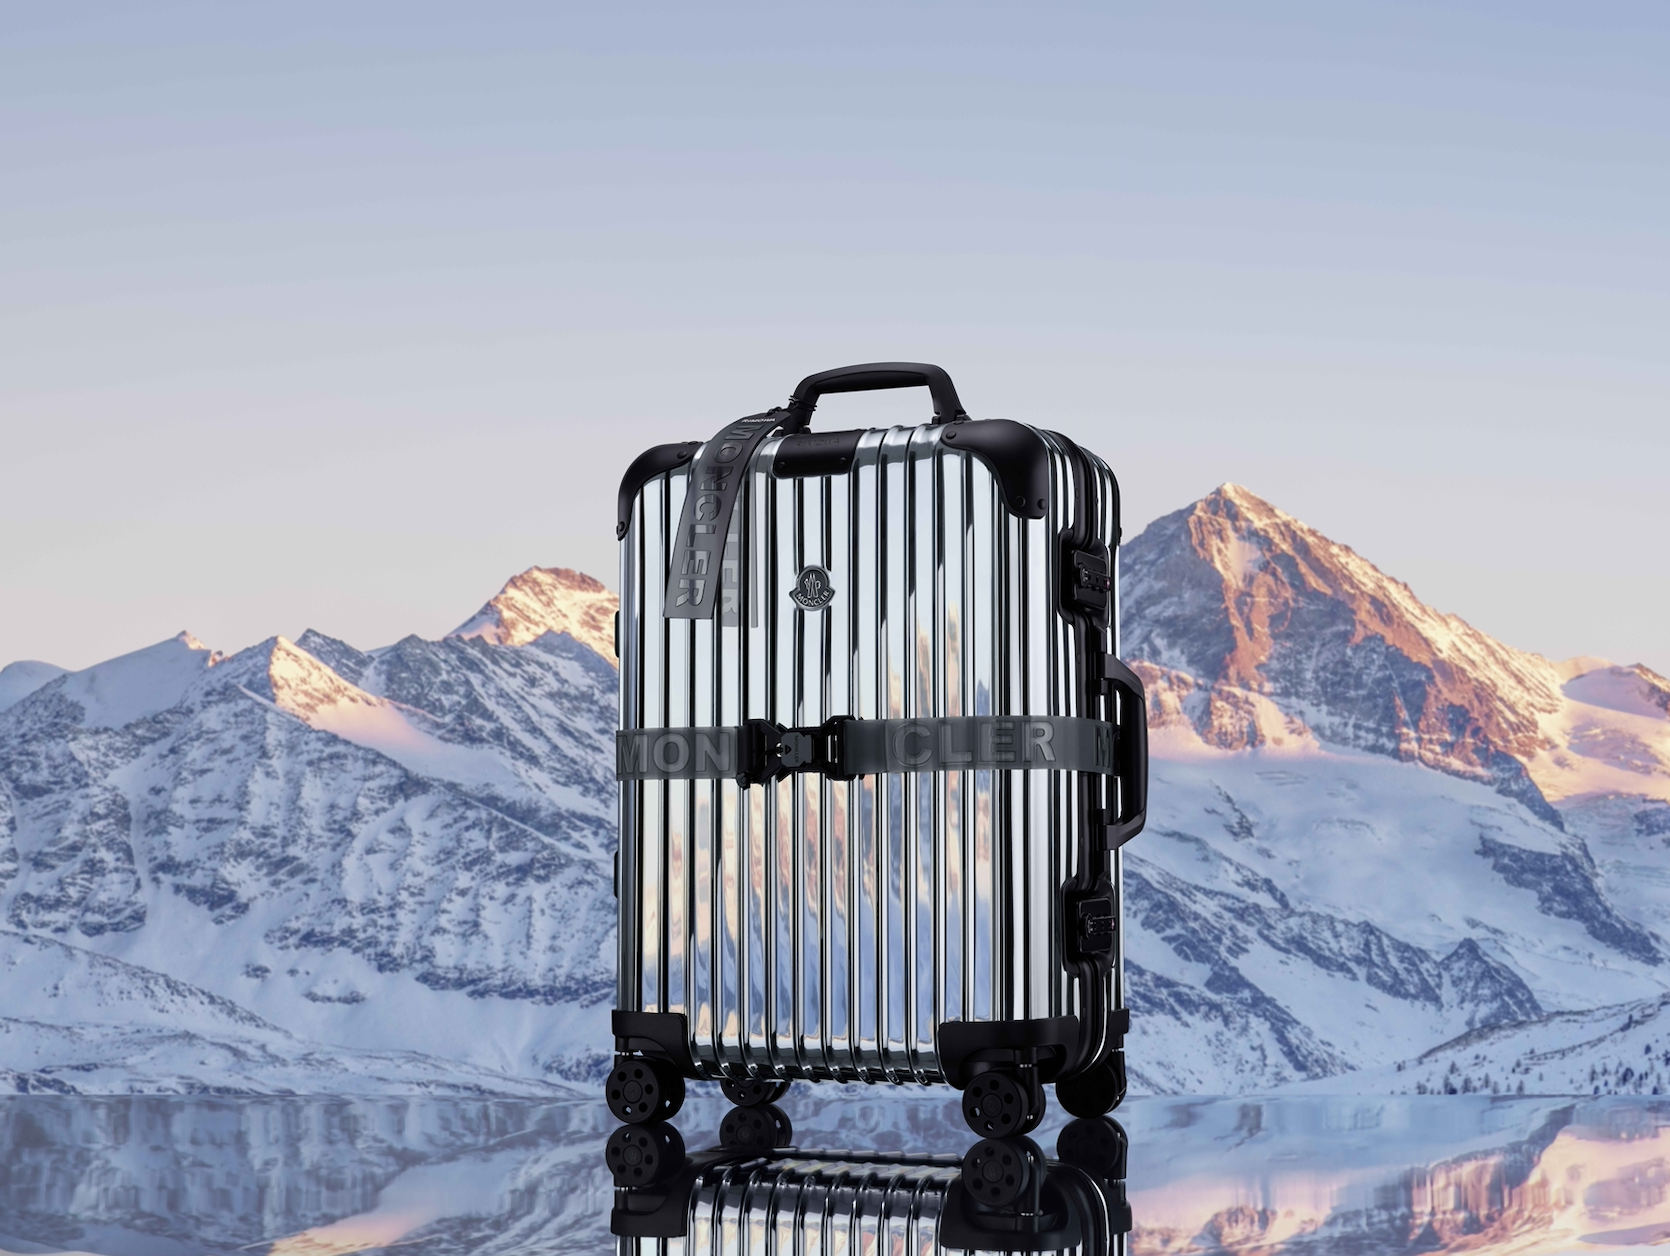 MONCLER_RIMOWA_REFLECTION_EDITORIAL_STILL_LIFE_IMAGES_01FLAUNT.jpg